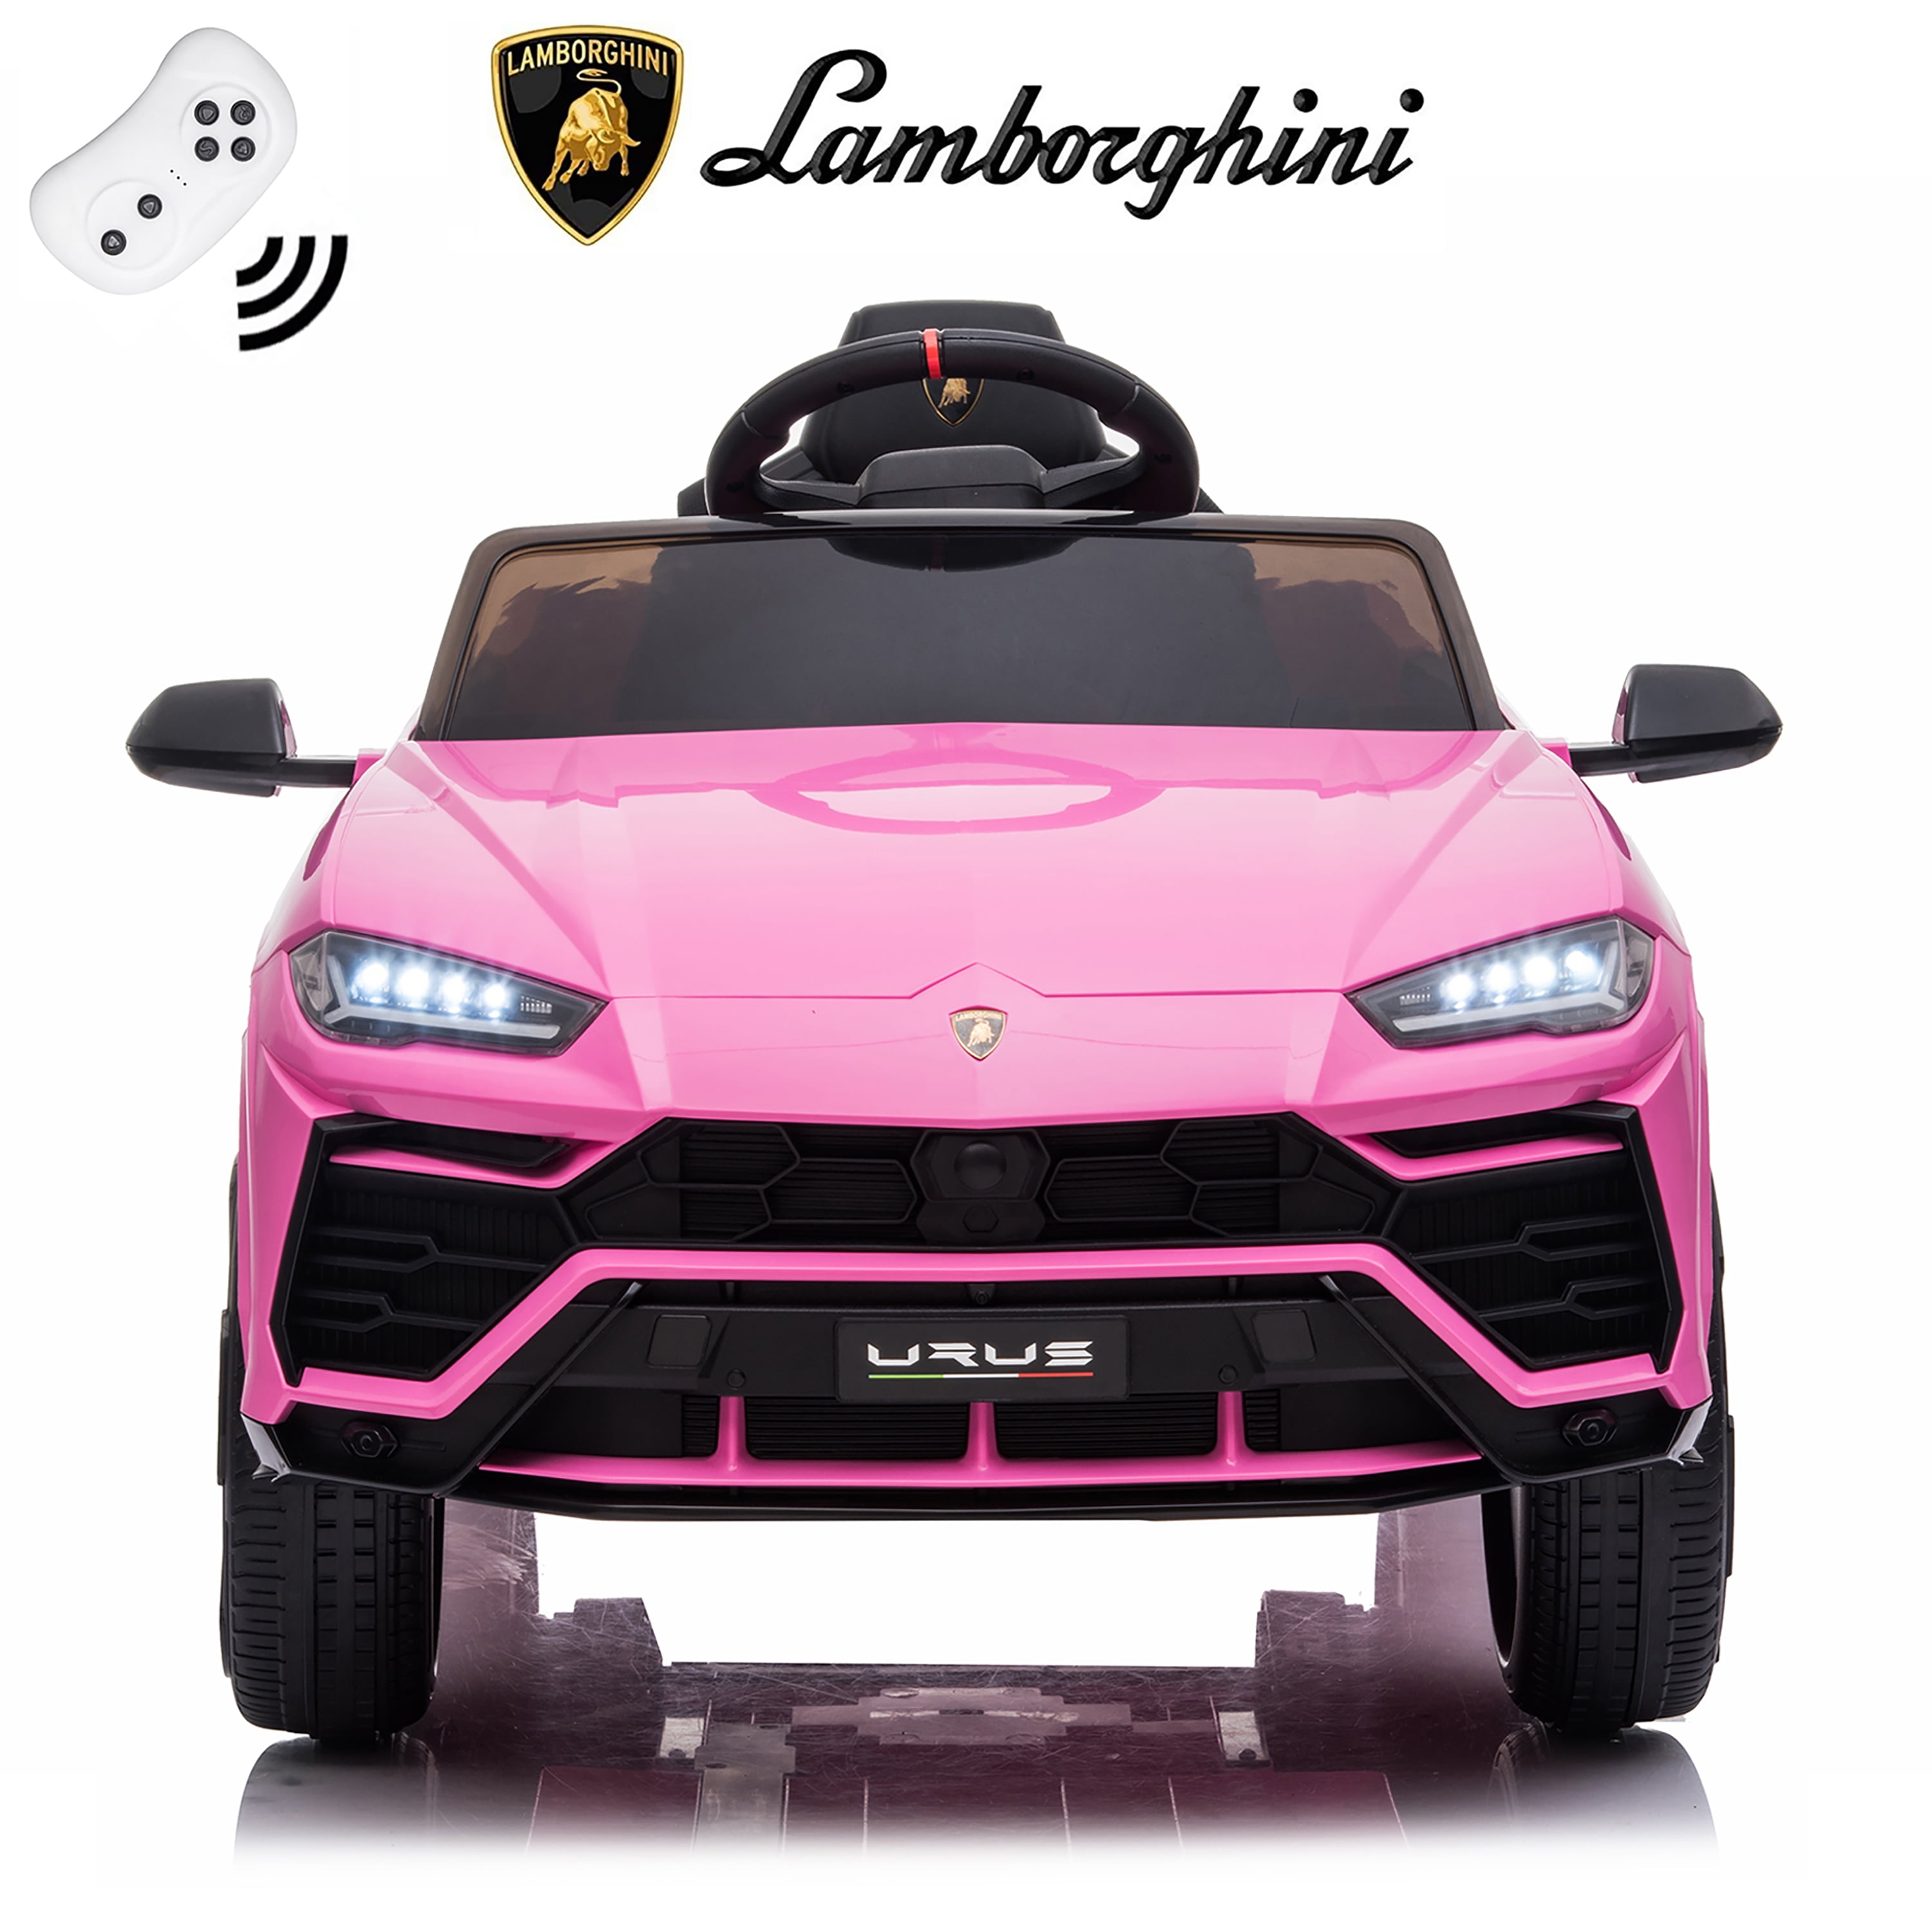 Lamborghini Ride on Cars 12V Battery Powered, Kids Ride On Cars With ...